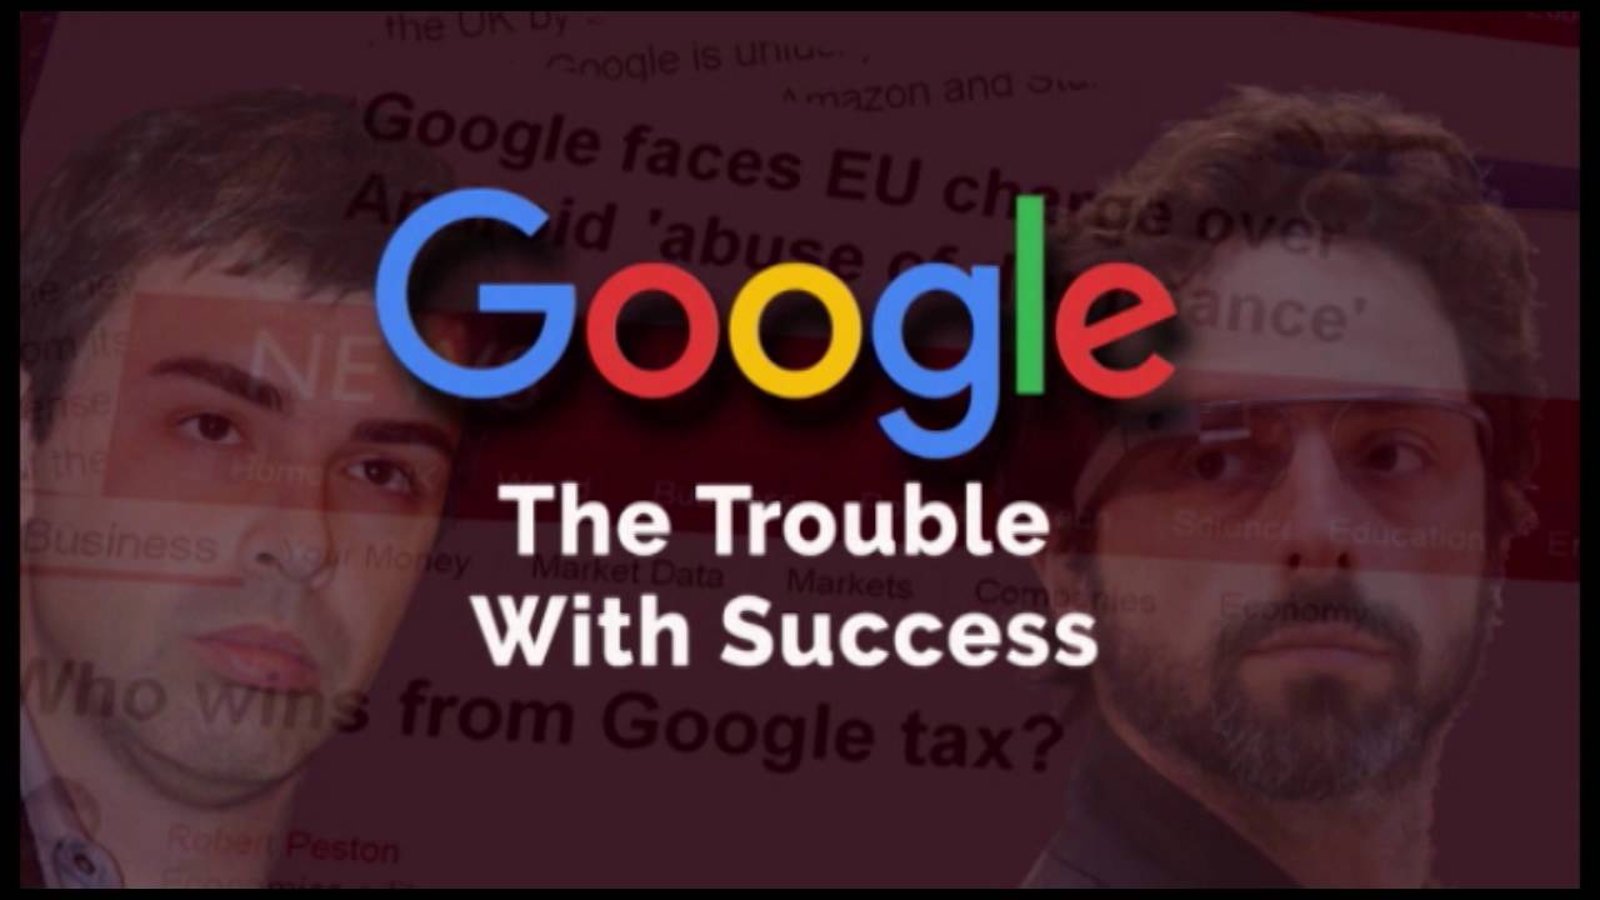 Google: The Trouble with Success